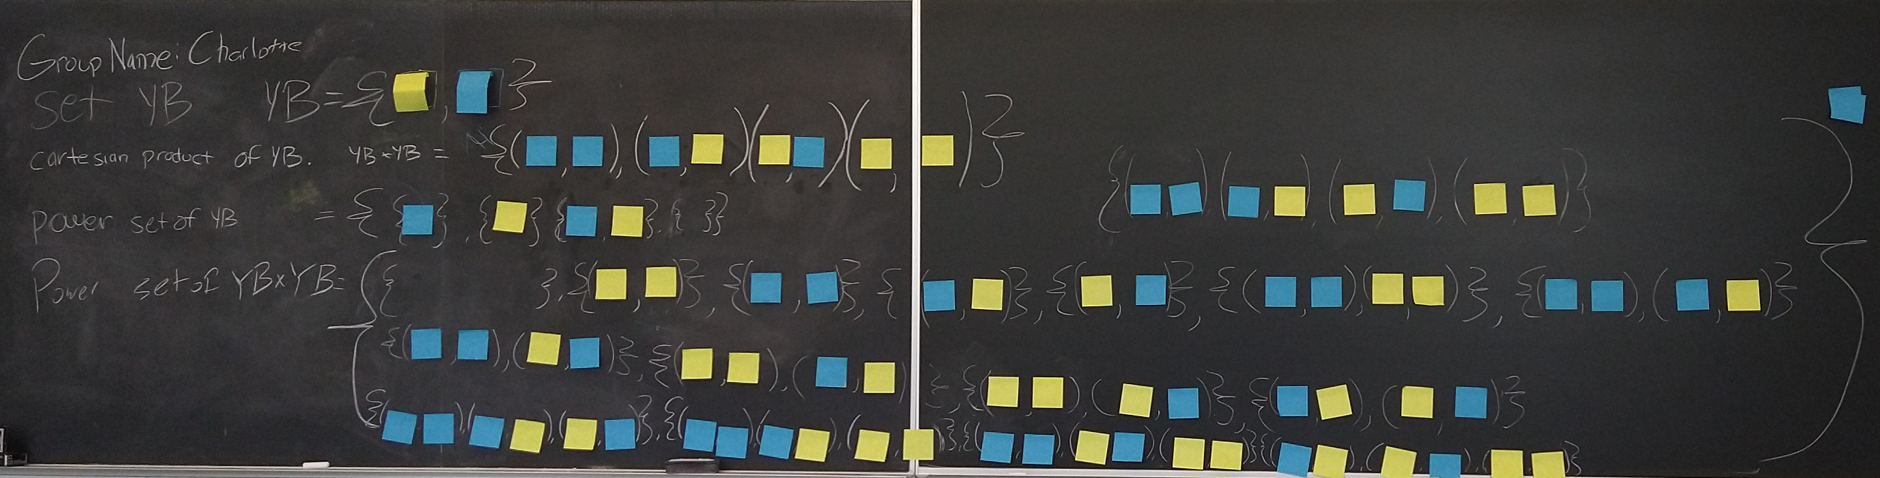 Picture of chalkboard with the following combination of chalk writings and sticky notes: As before, there is the Group name listed as Charlotte; a set named YB defined by placing an actual yellow sticky note comma-separated by an actual blue sticky note within curly brackets; the cartesian product of YB with itself; and, the power set of the cartesian product of YB with itself, which has all subsets of YB cross YB.